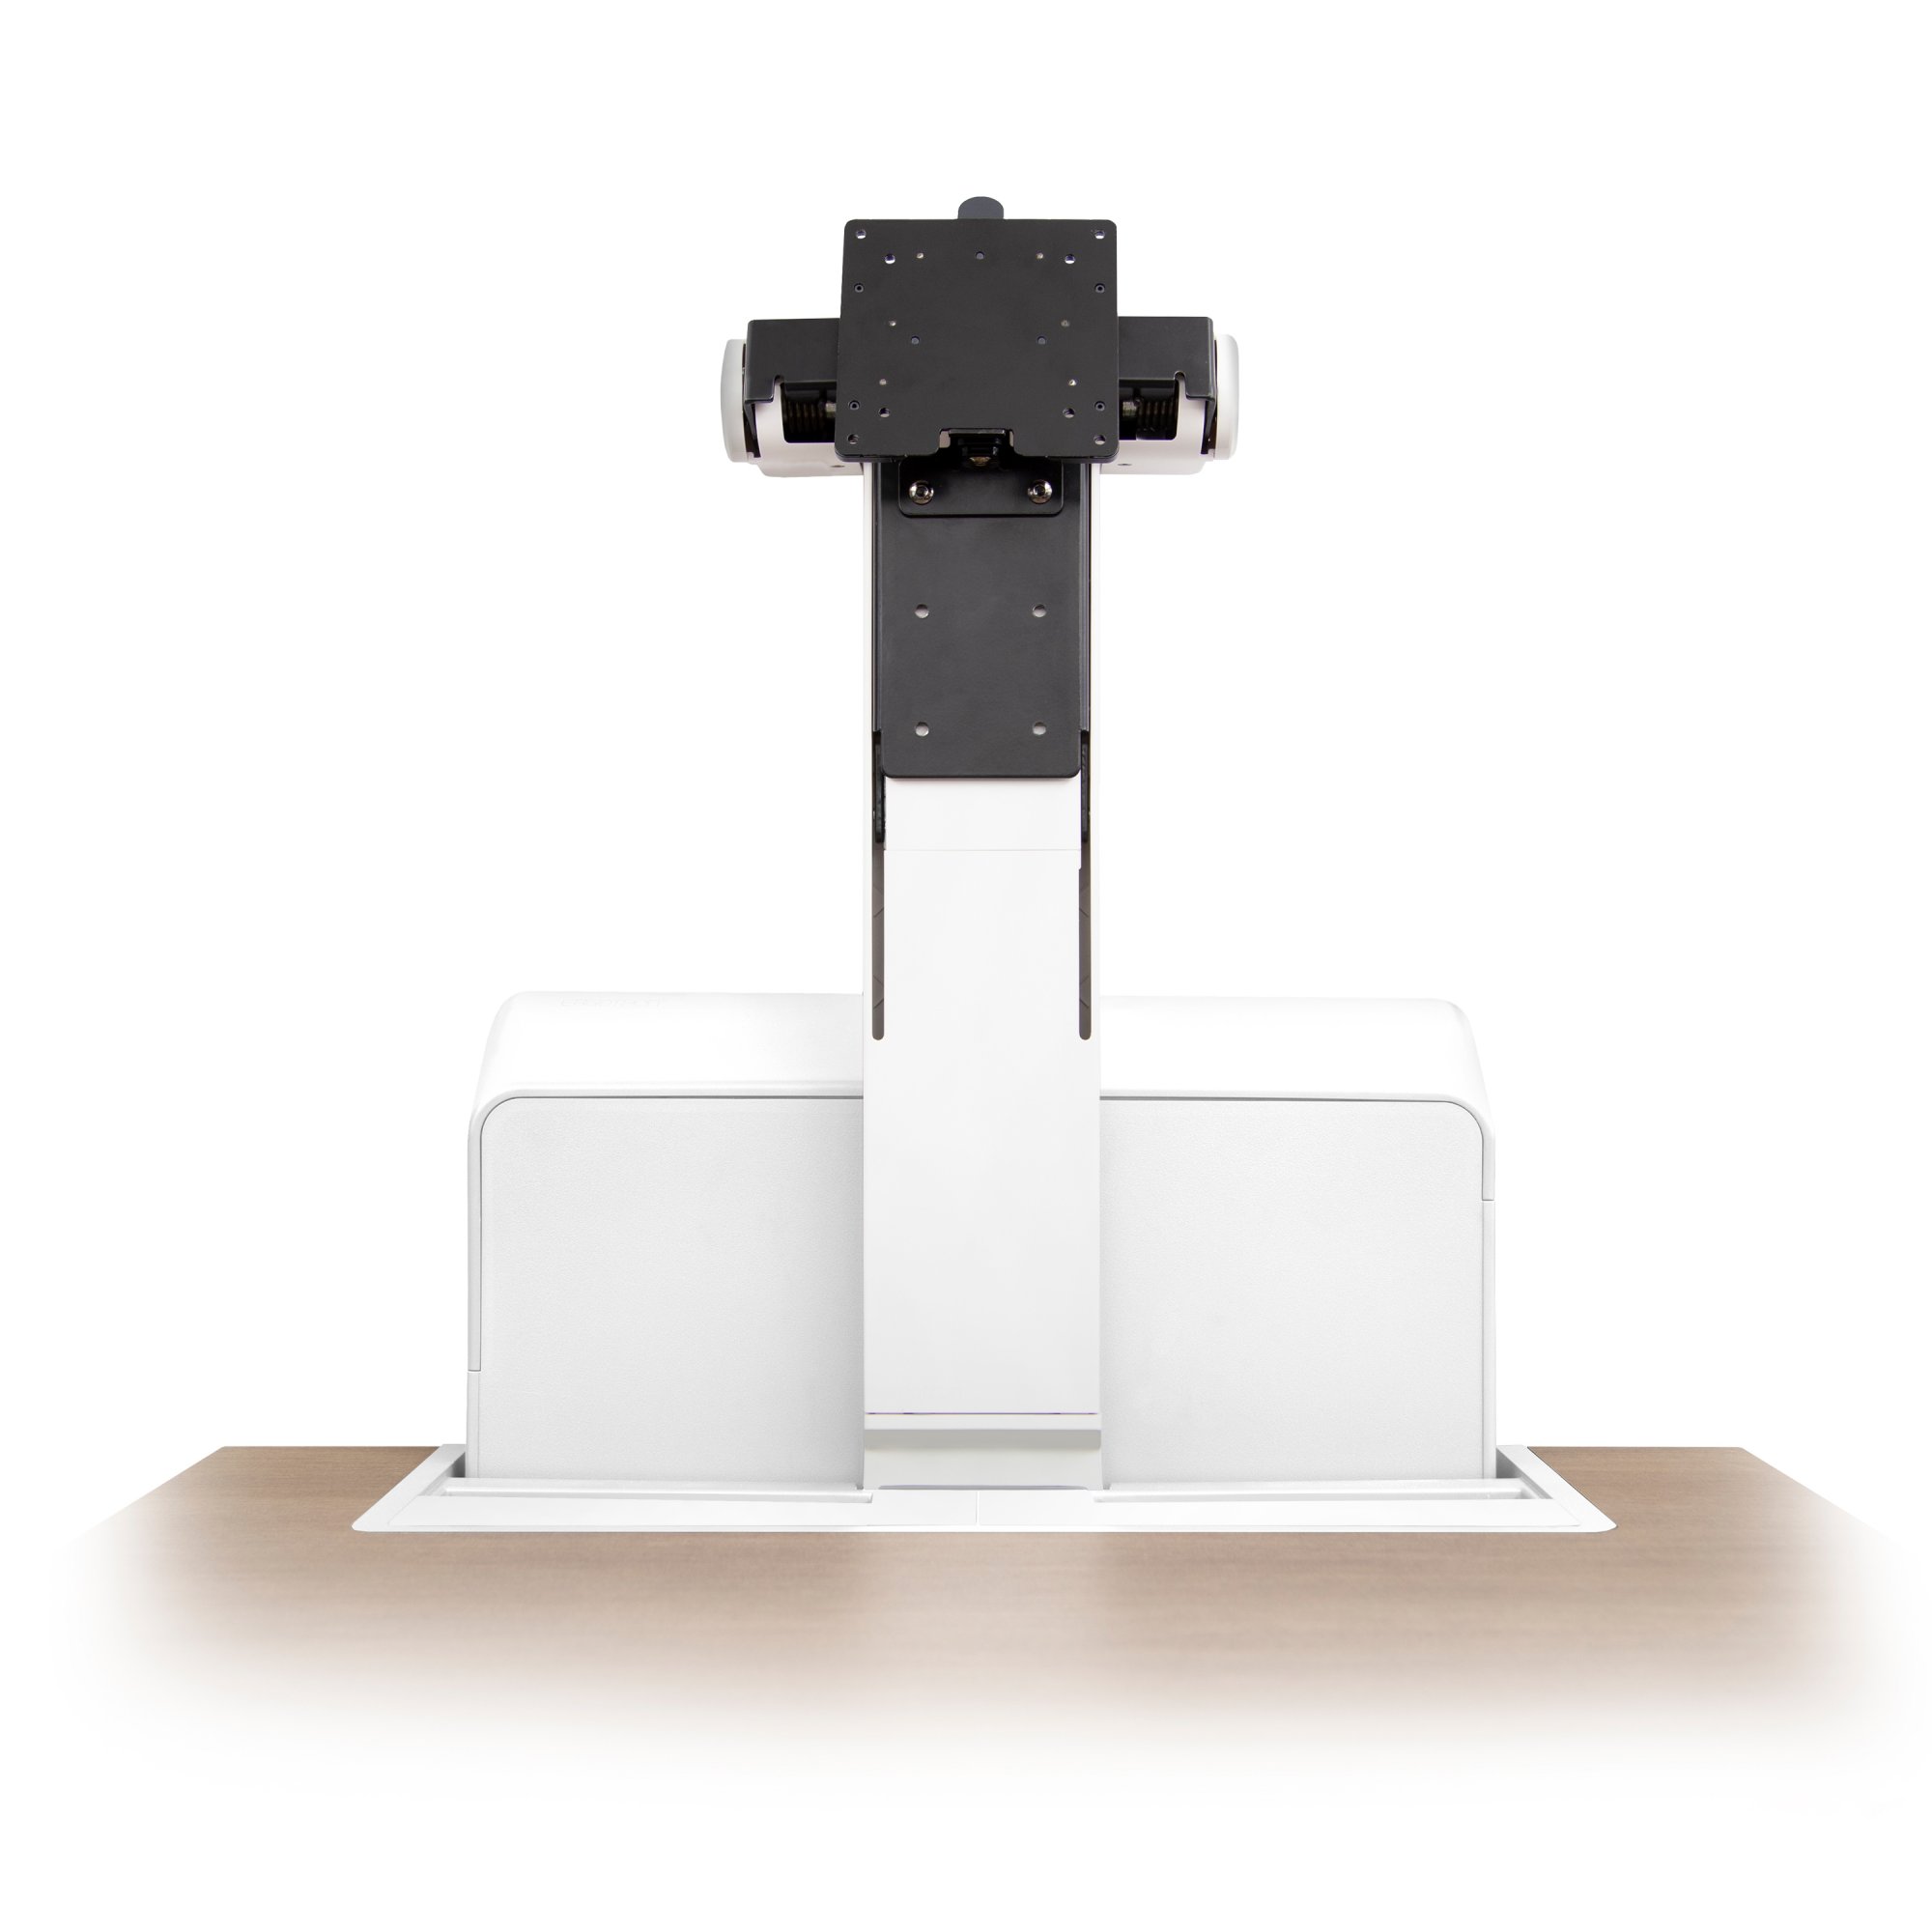 Easily lift and tilt a screen weighing 14–28 lbs (6.4–12.7 kg) for comfortable working